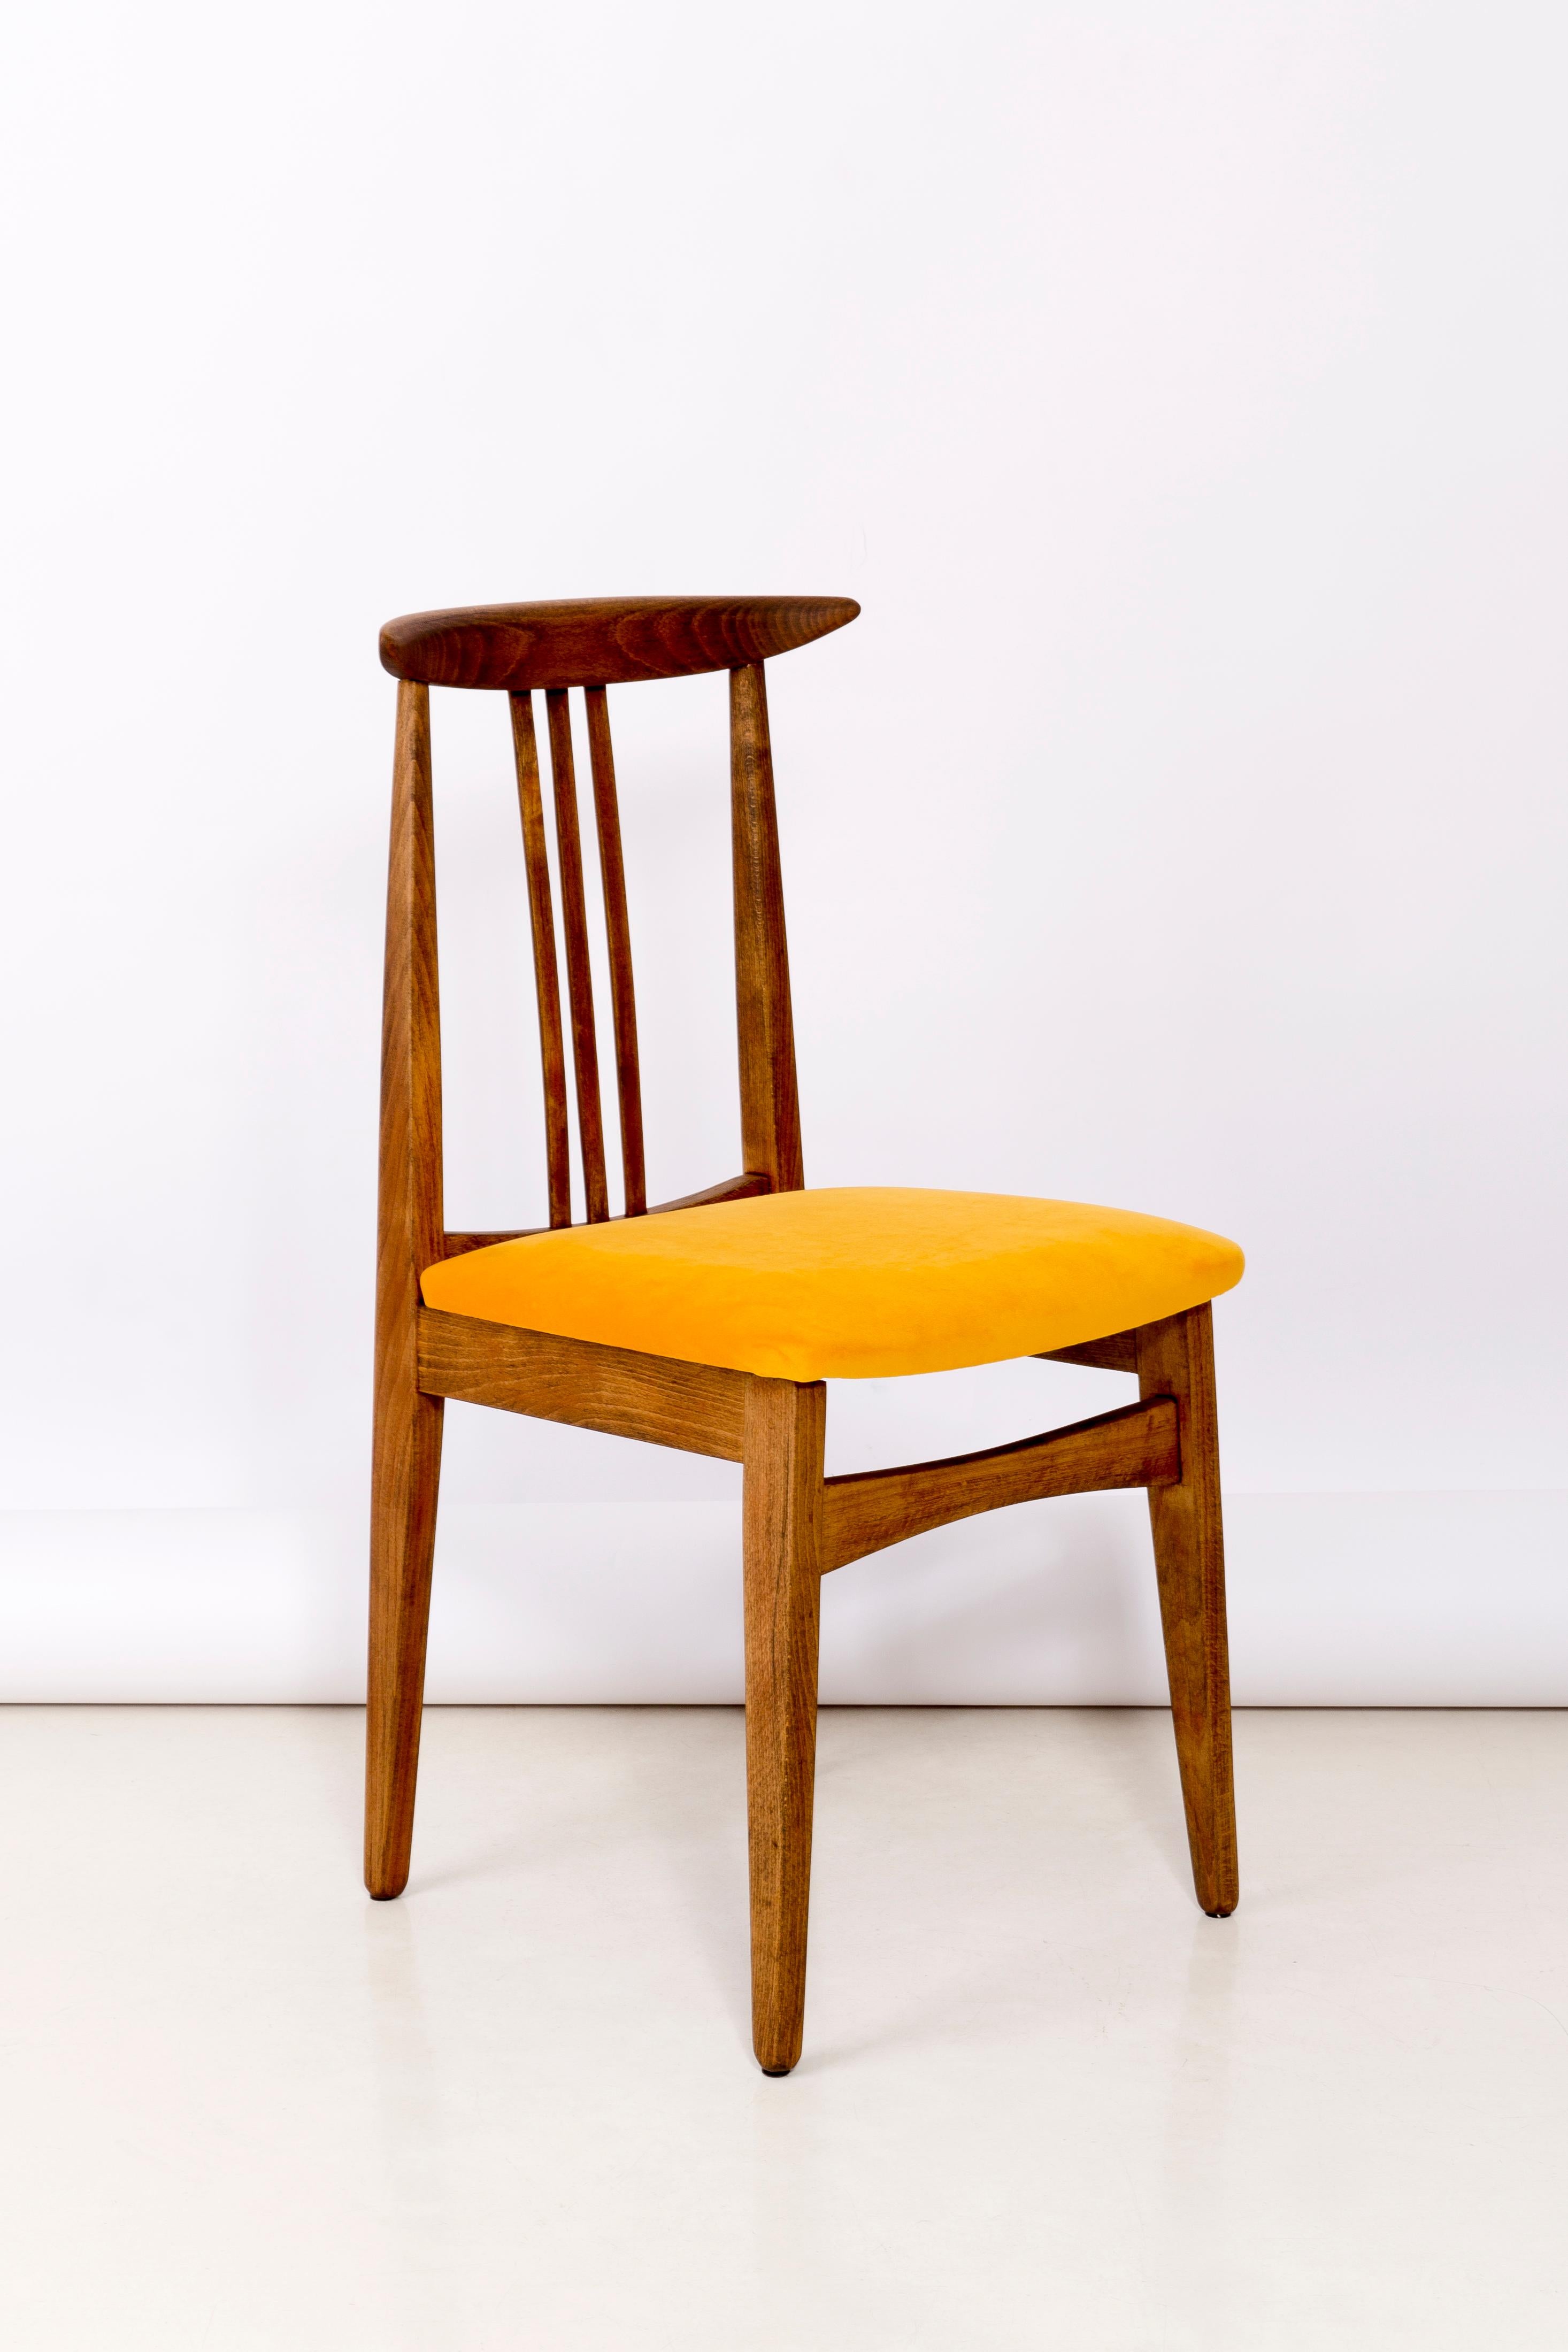 20th Century Set of Ten Yellow Chairs, by Zielinski, Europe, 1960s For Sale